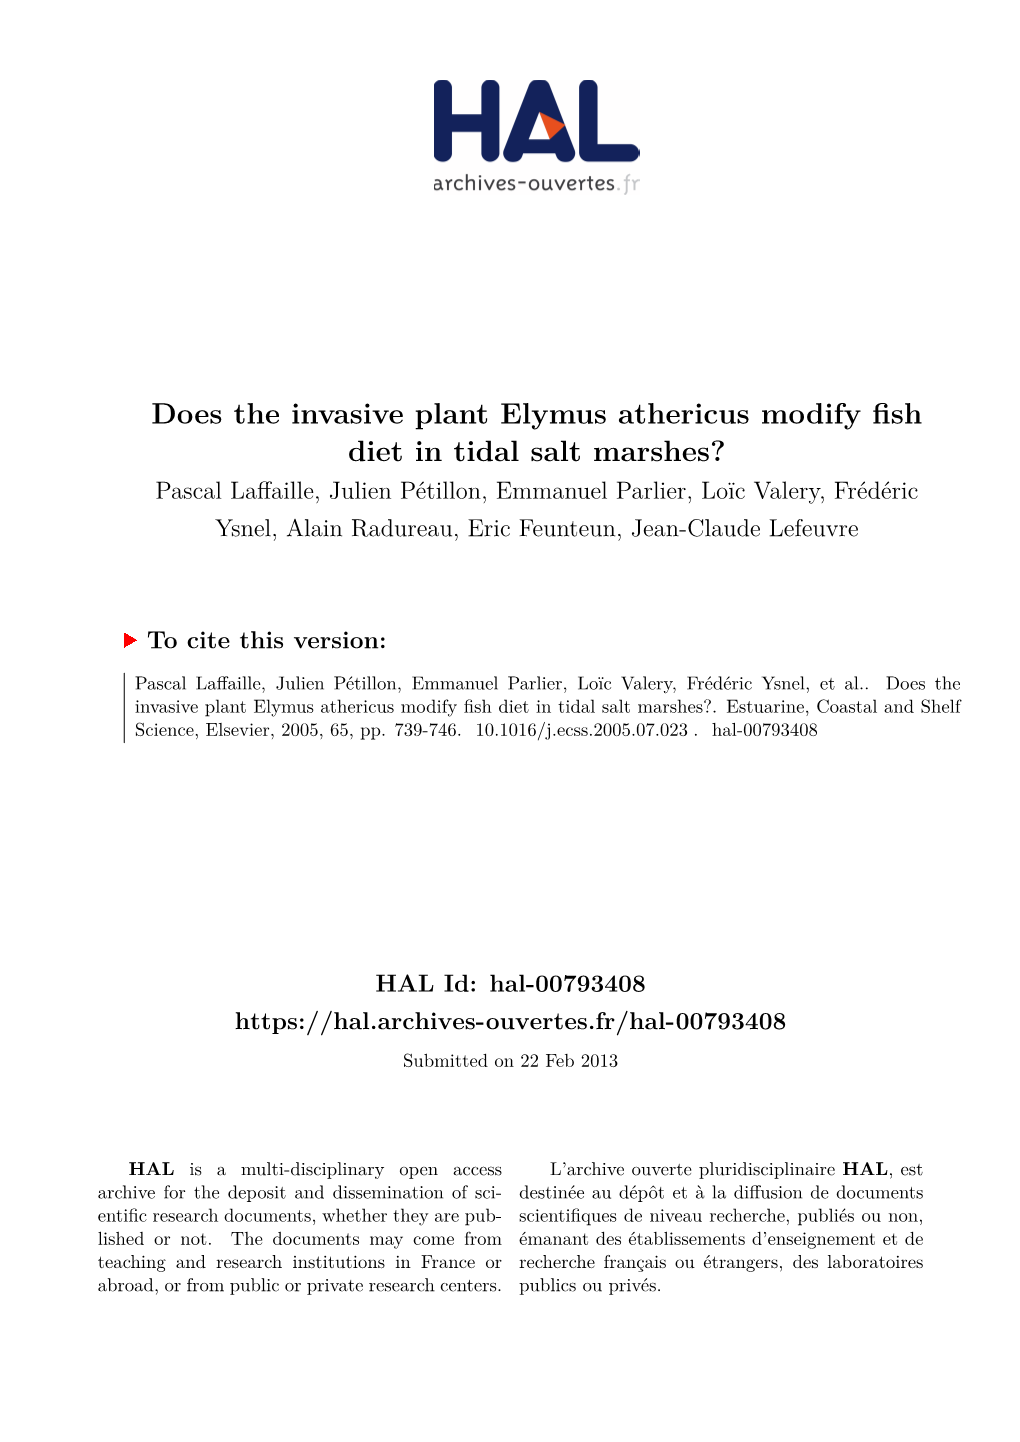 Does the Invasive Plant Elymus Athericus Modify Fish Diet in Tidal Salt